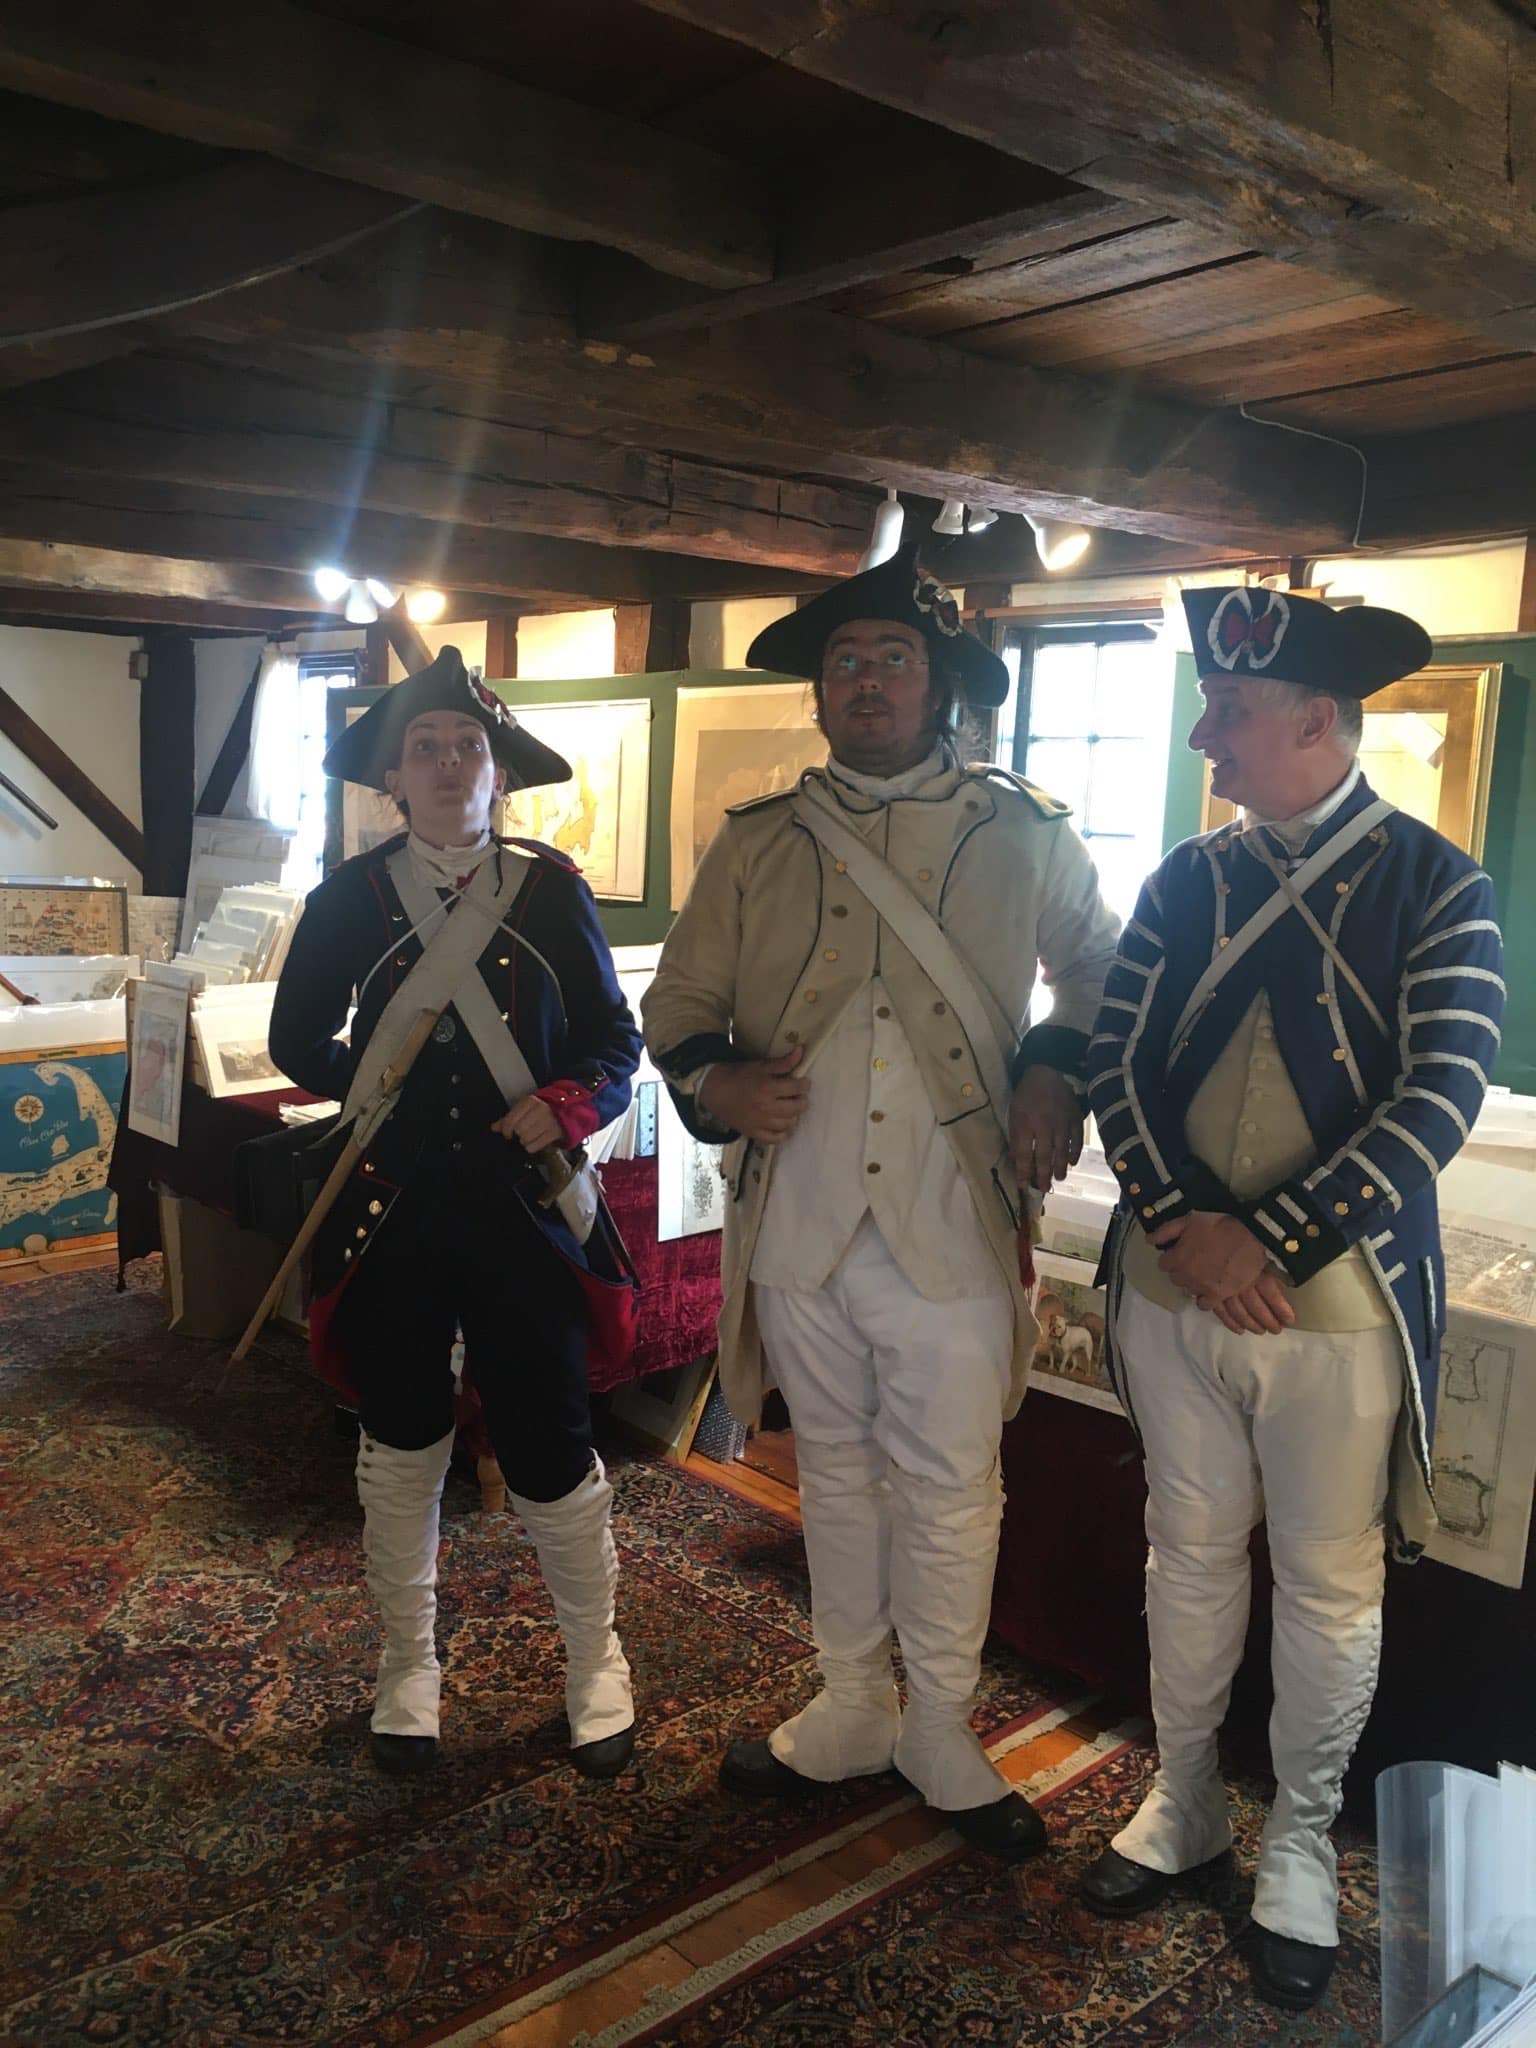 Three Revolutionary War reinactors in French military uniforms, the uniforms are extremely detailed,. They are inn Newport RI, on historic Bowens Wharf. Inside an unusual shop, or Antique Prints and Old Maps Gallery. Their expressions show awe in the 18th Century freight elevator, smack dab in the middle of, Anne Hall Antique Prints Gallery.